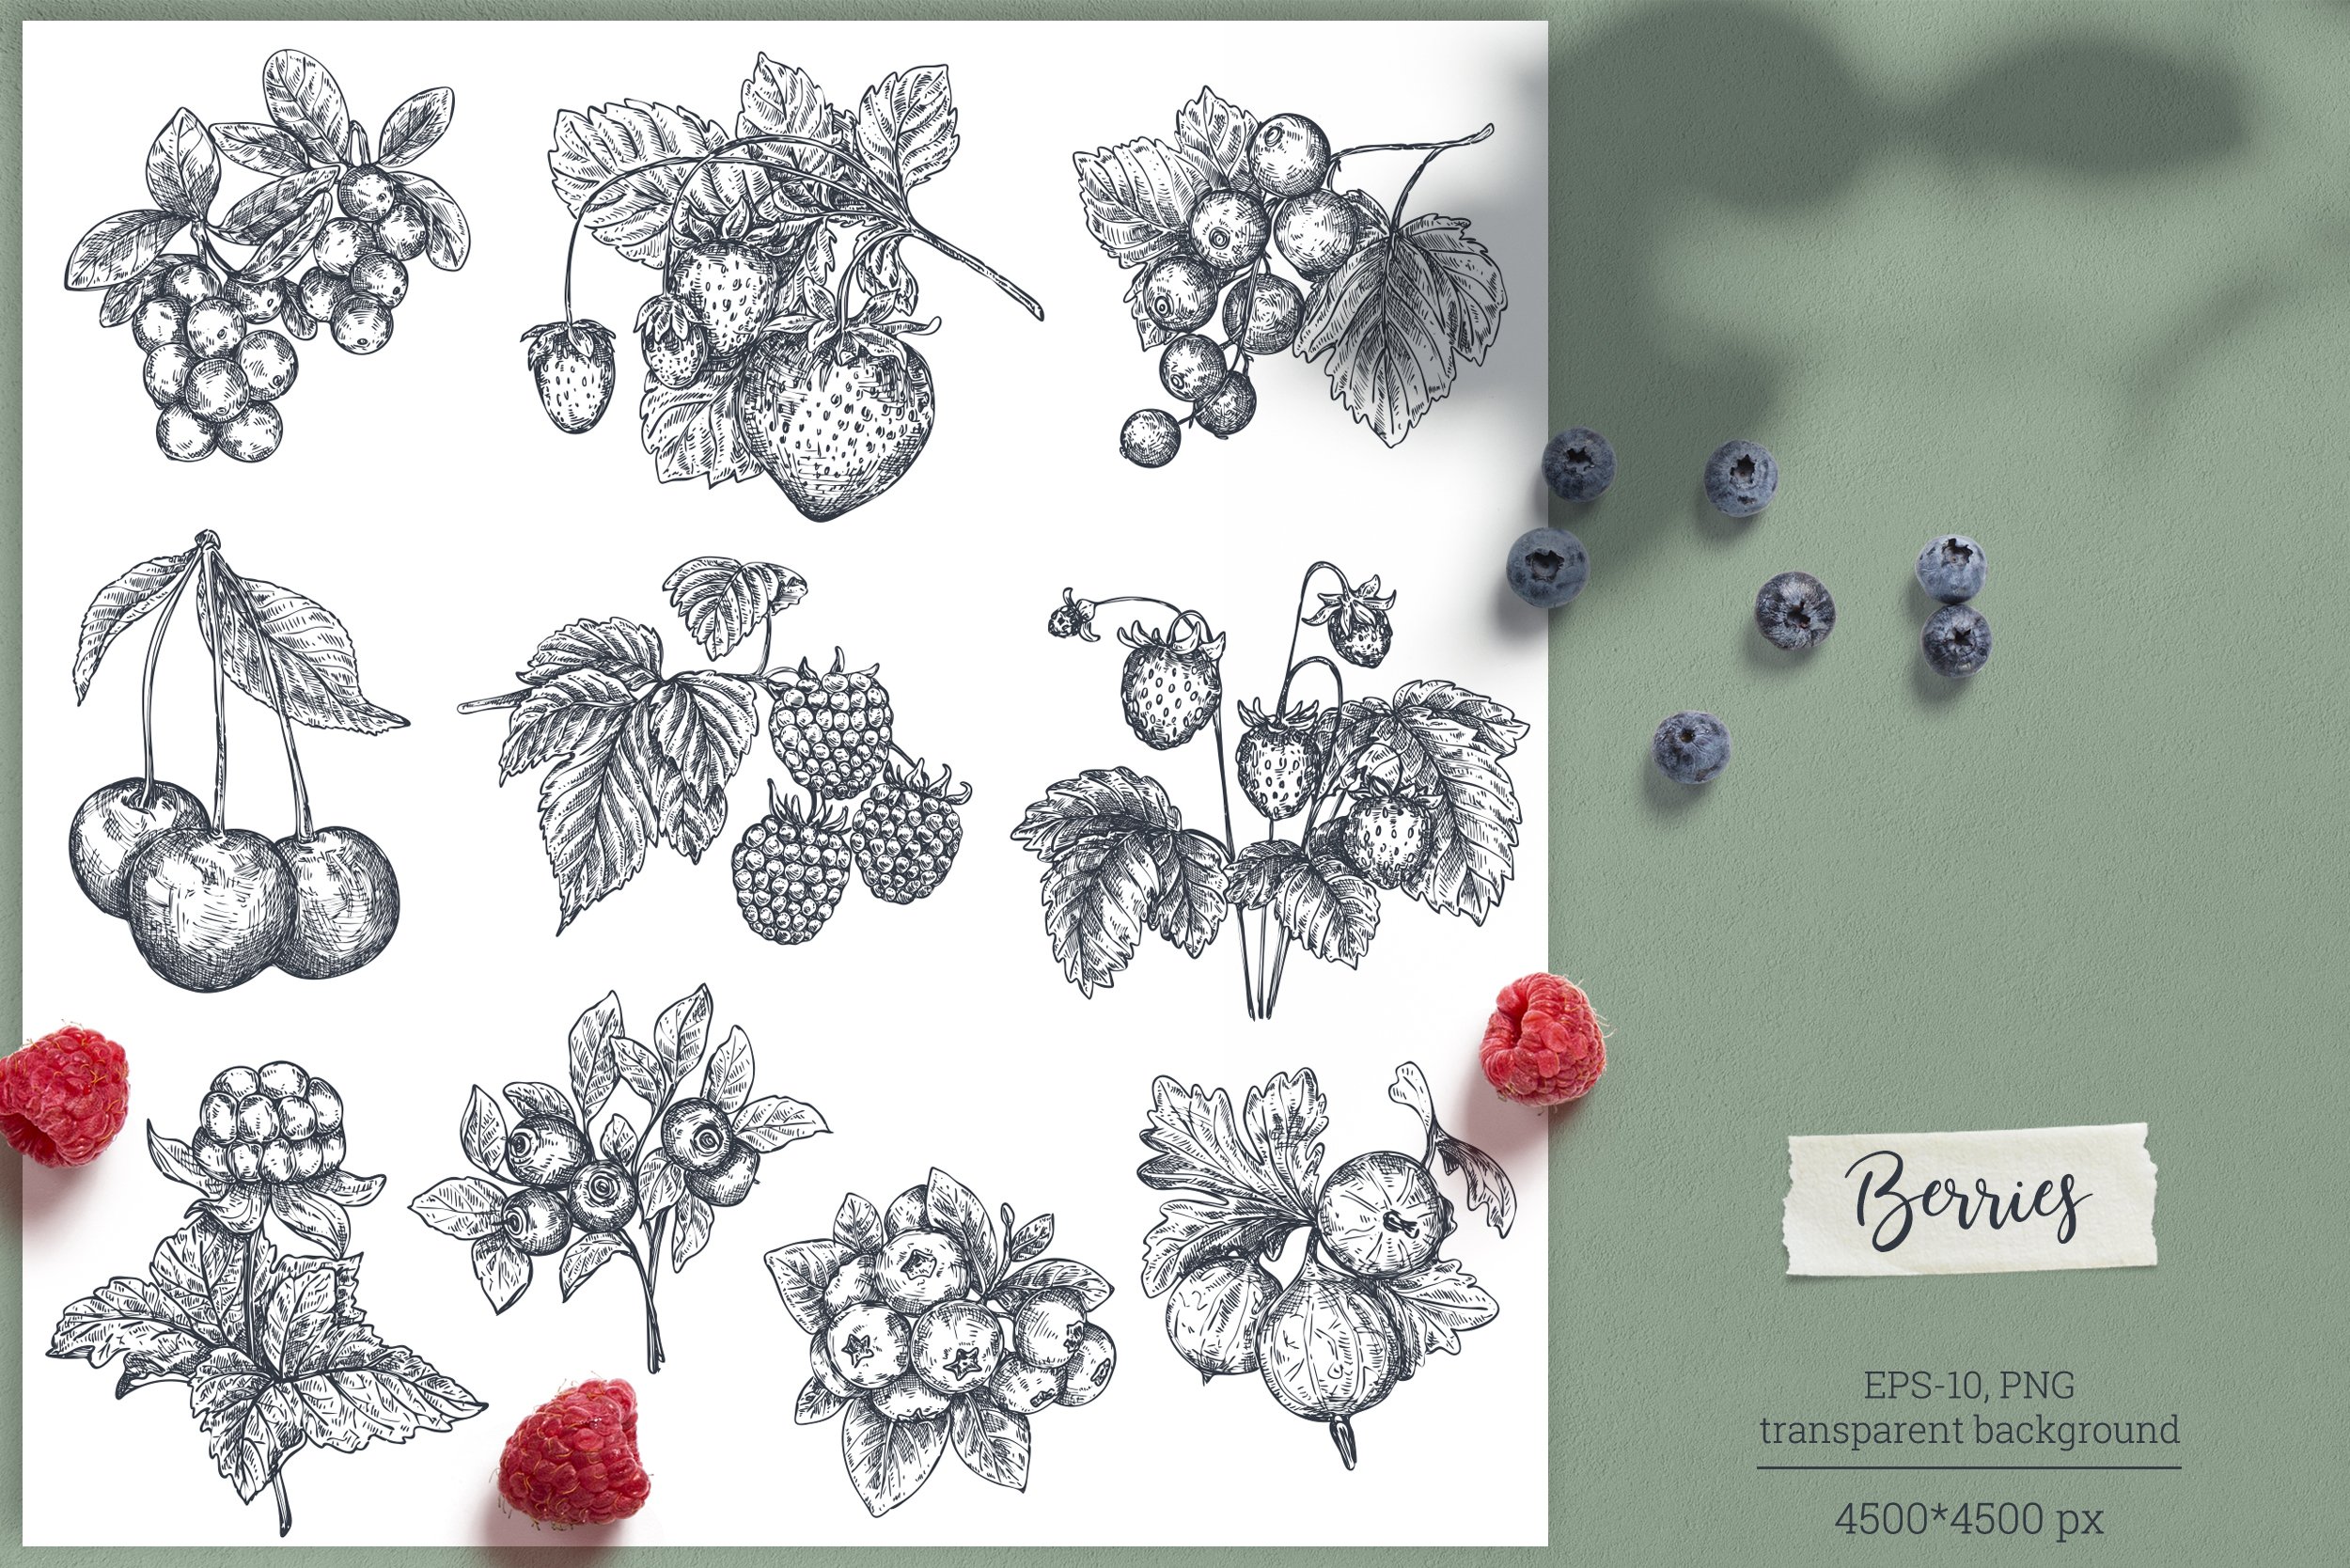 Berries vector collection preview image.